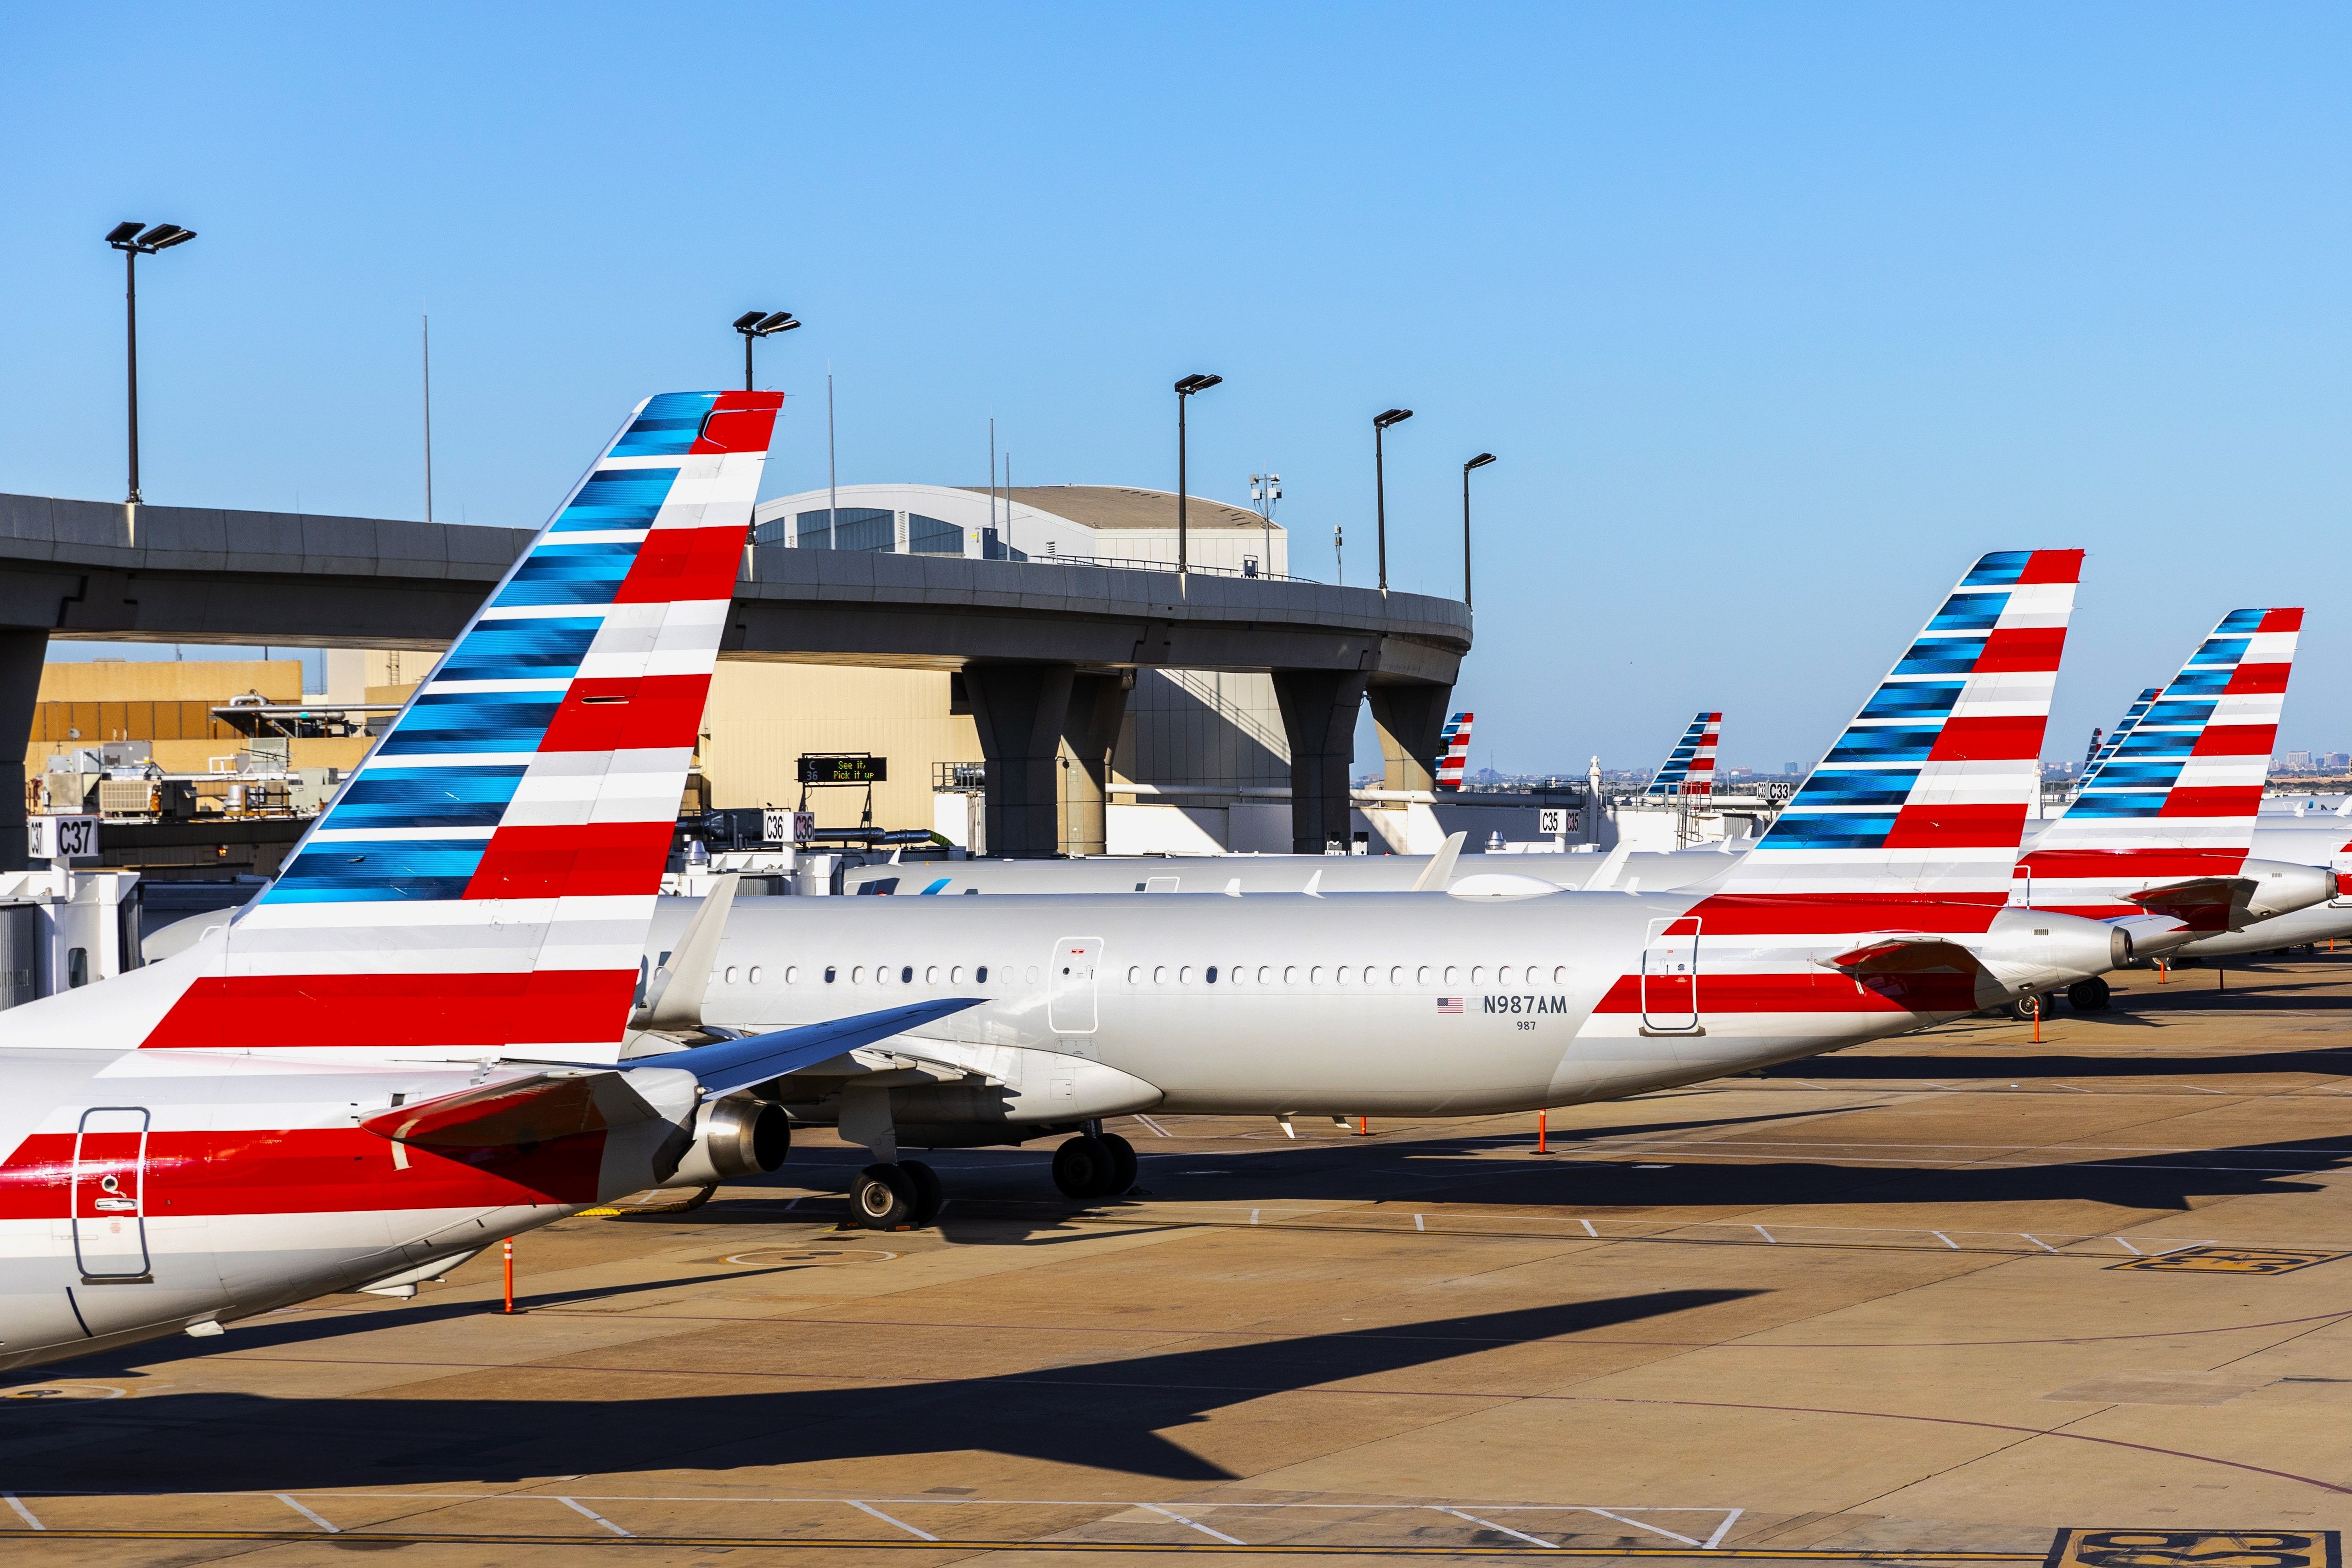 Several American Airlines Aircraft Parked at DFW Airport.